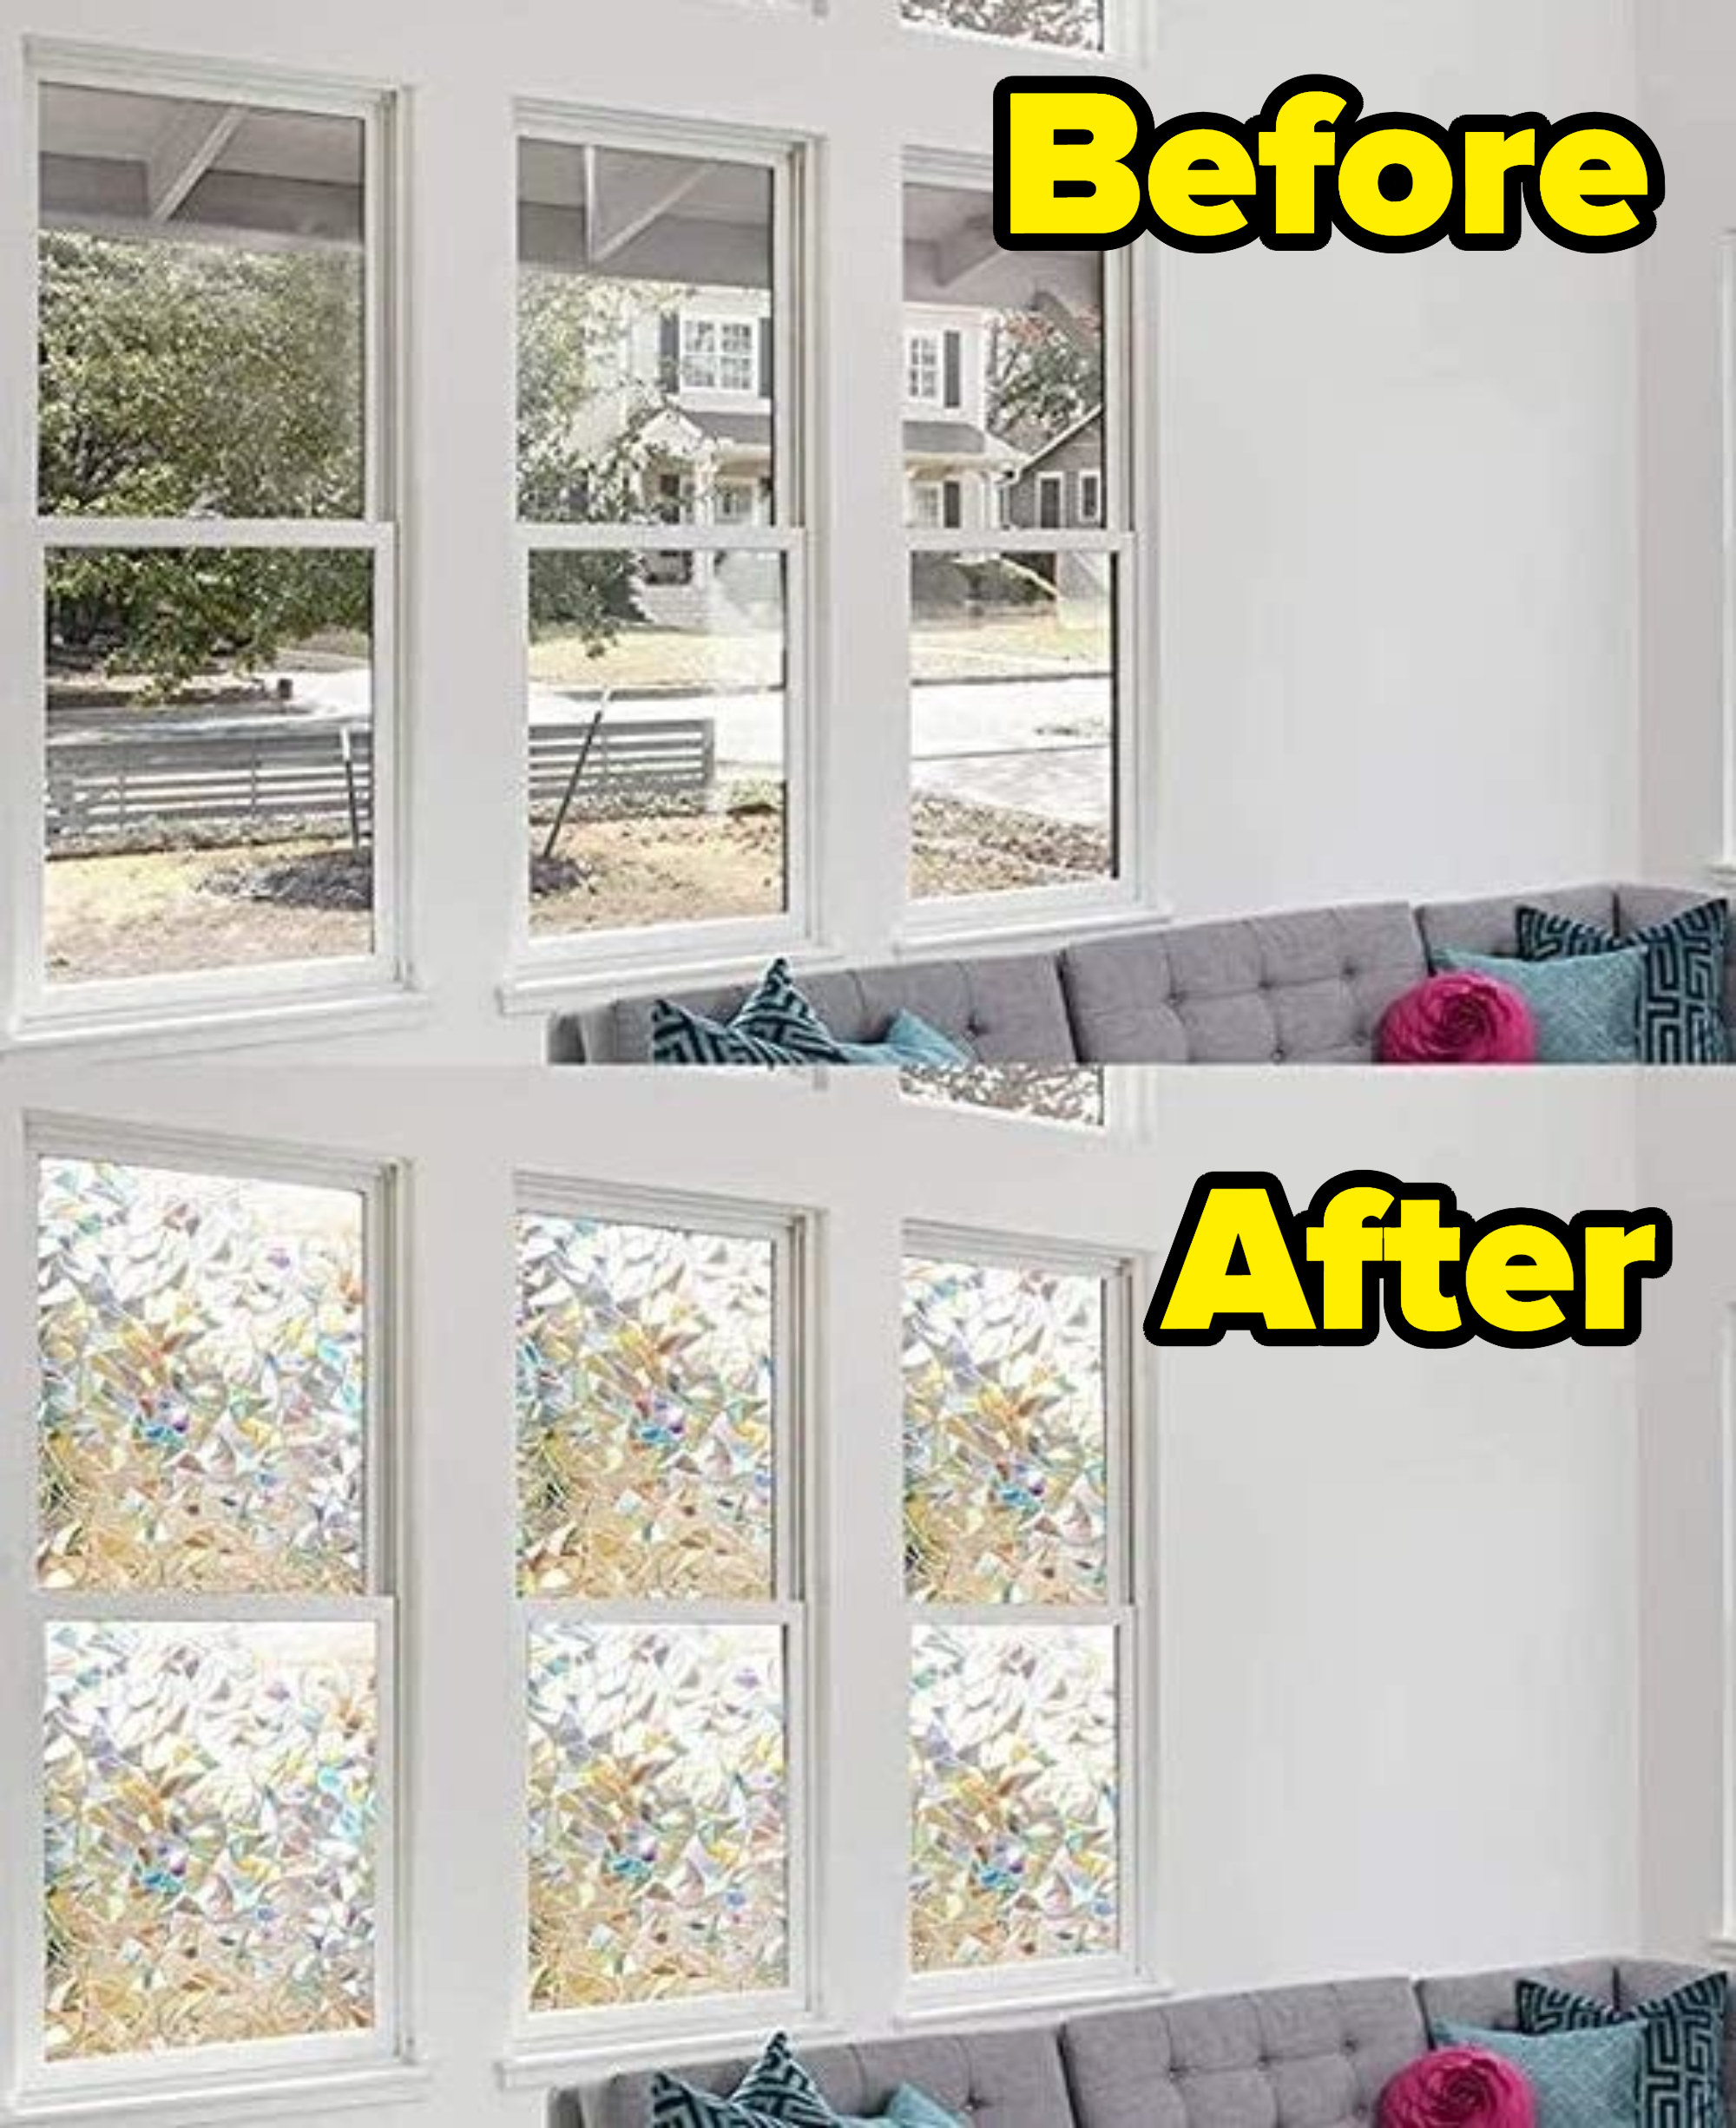 A before of clear windows, and an after of the windows covered in rainbow privacy clings